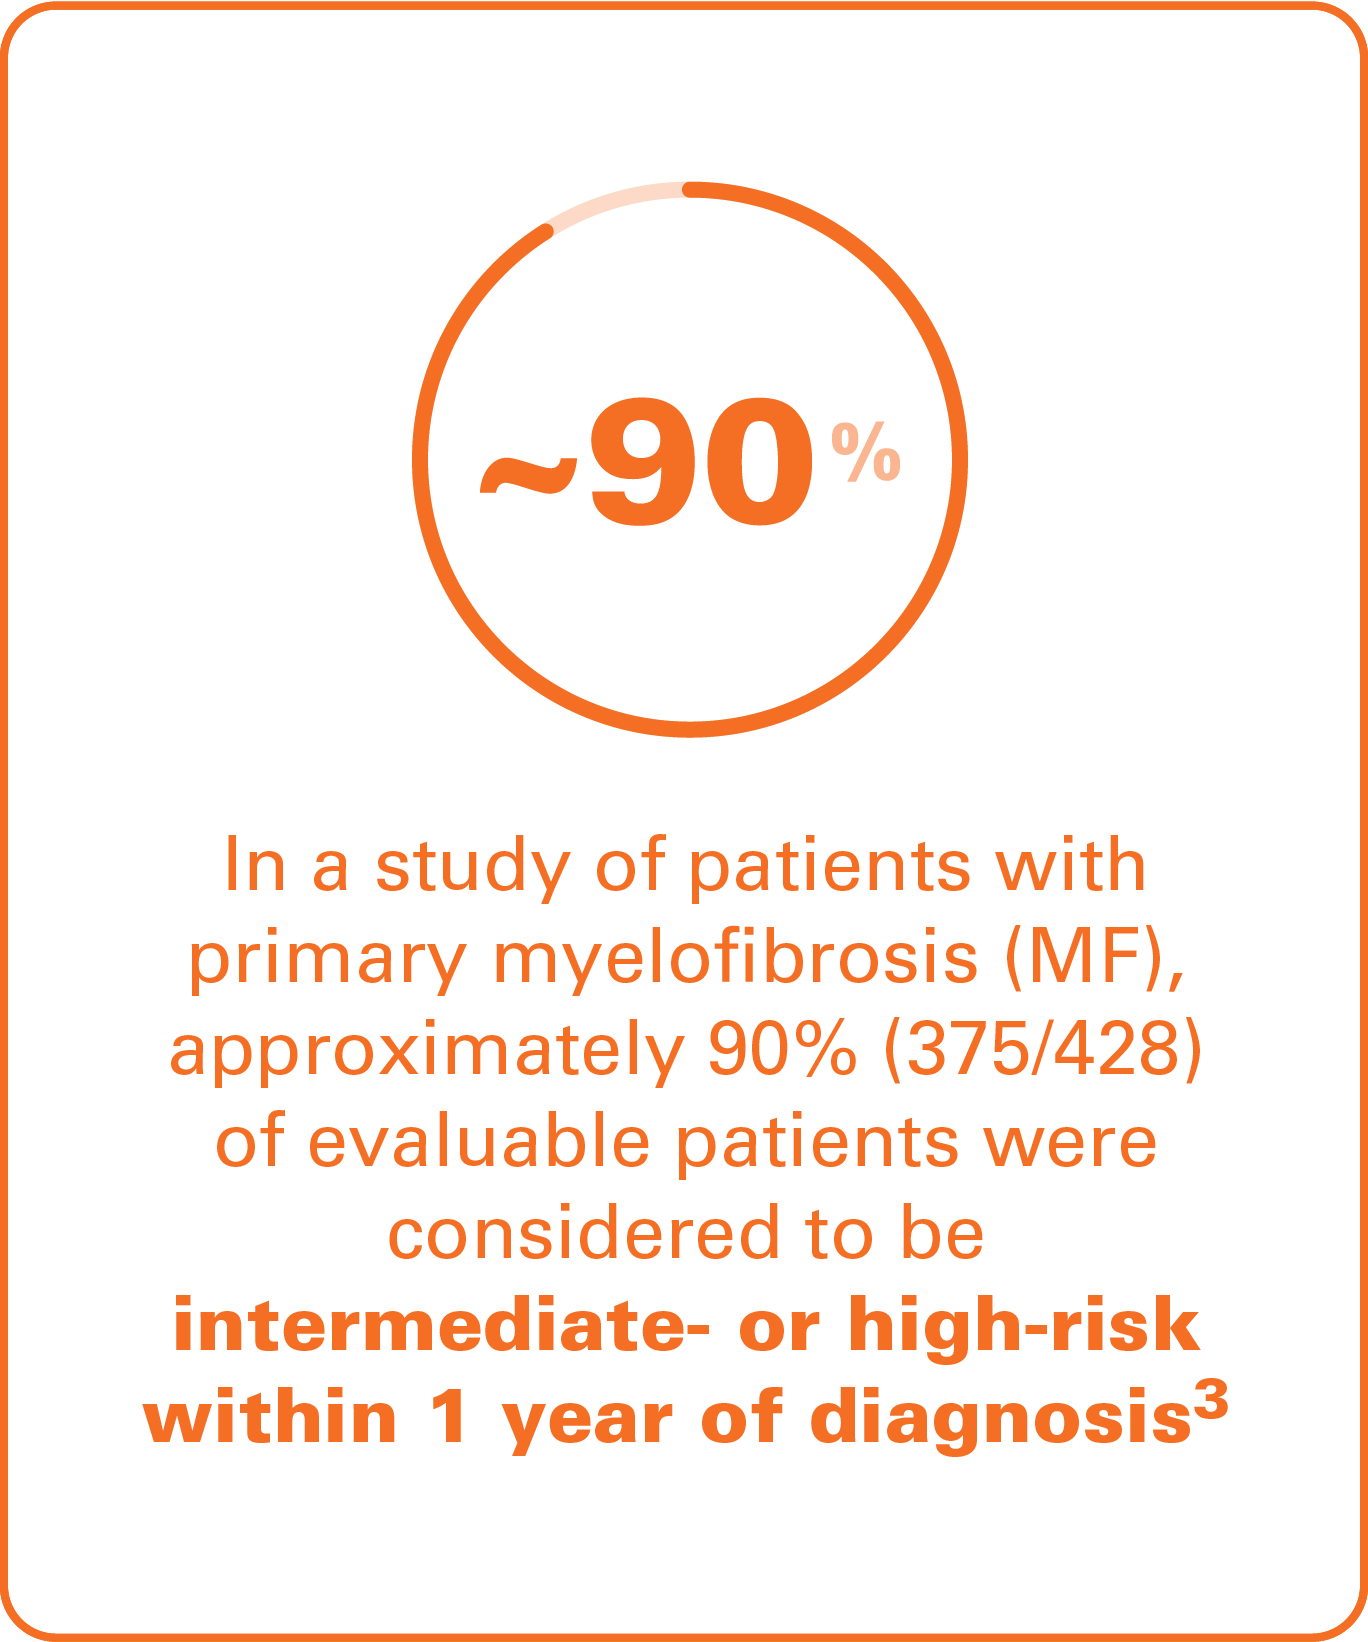 Image of text  that says In a study of patients with primary myelofibrosis (MF), approximately 90% (375/428) of evaluable patients were considered to be intermediate- or high-risk within 1 year of diagnosis